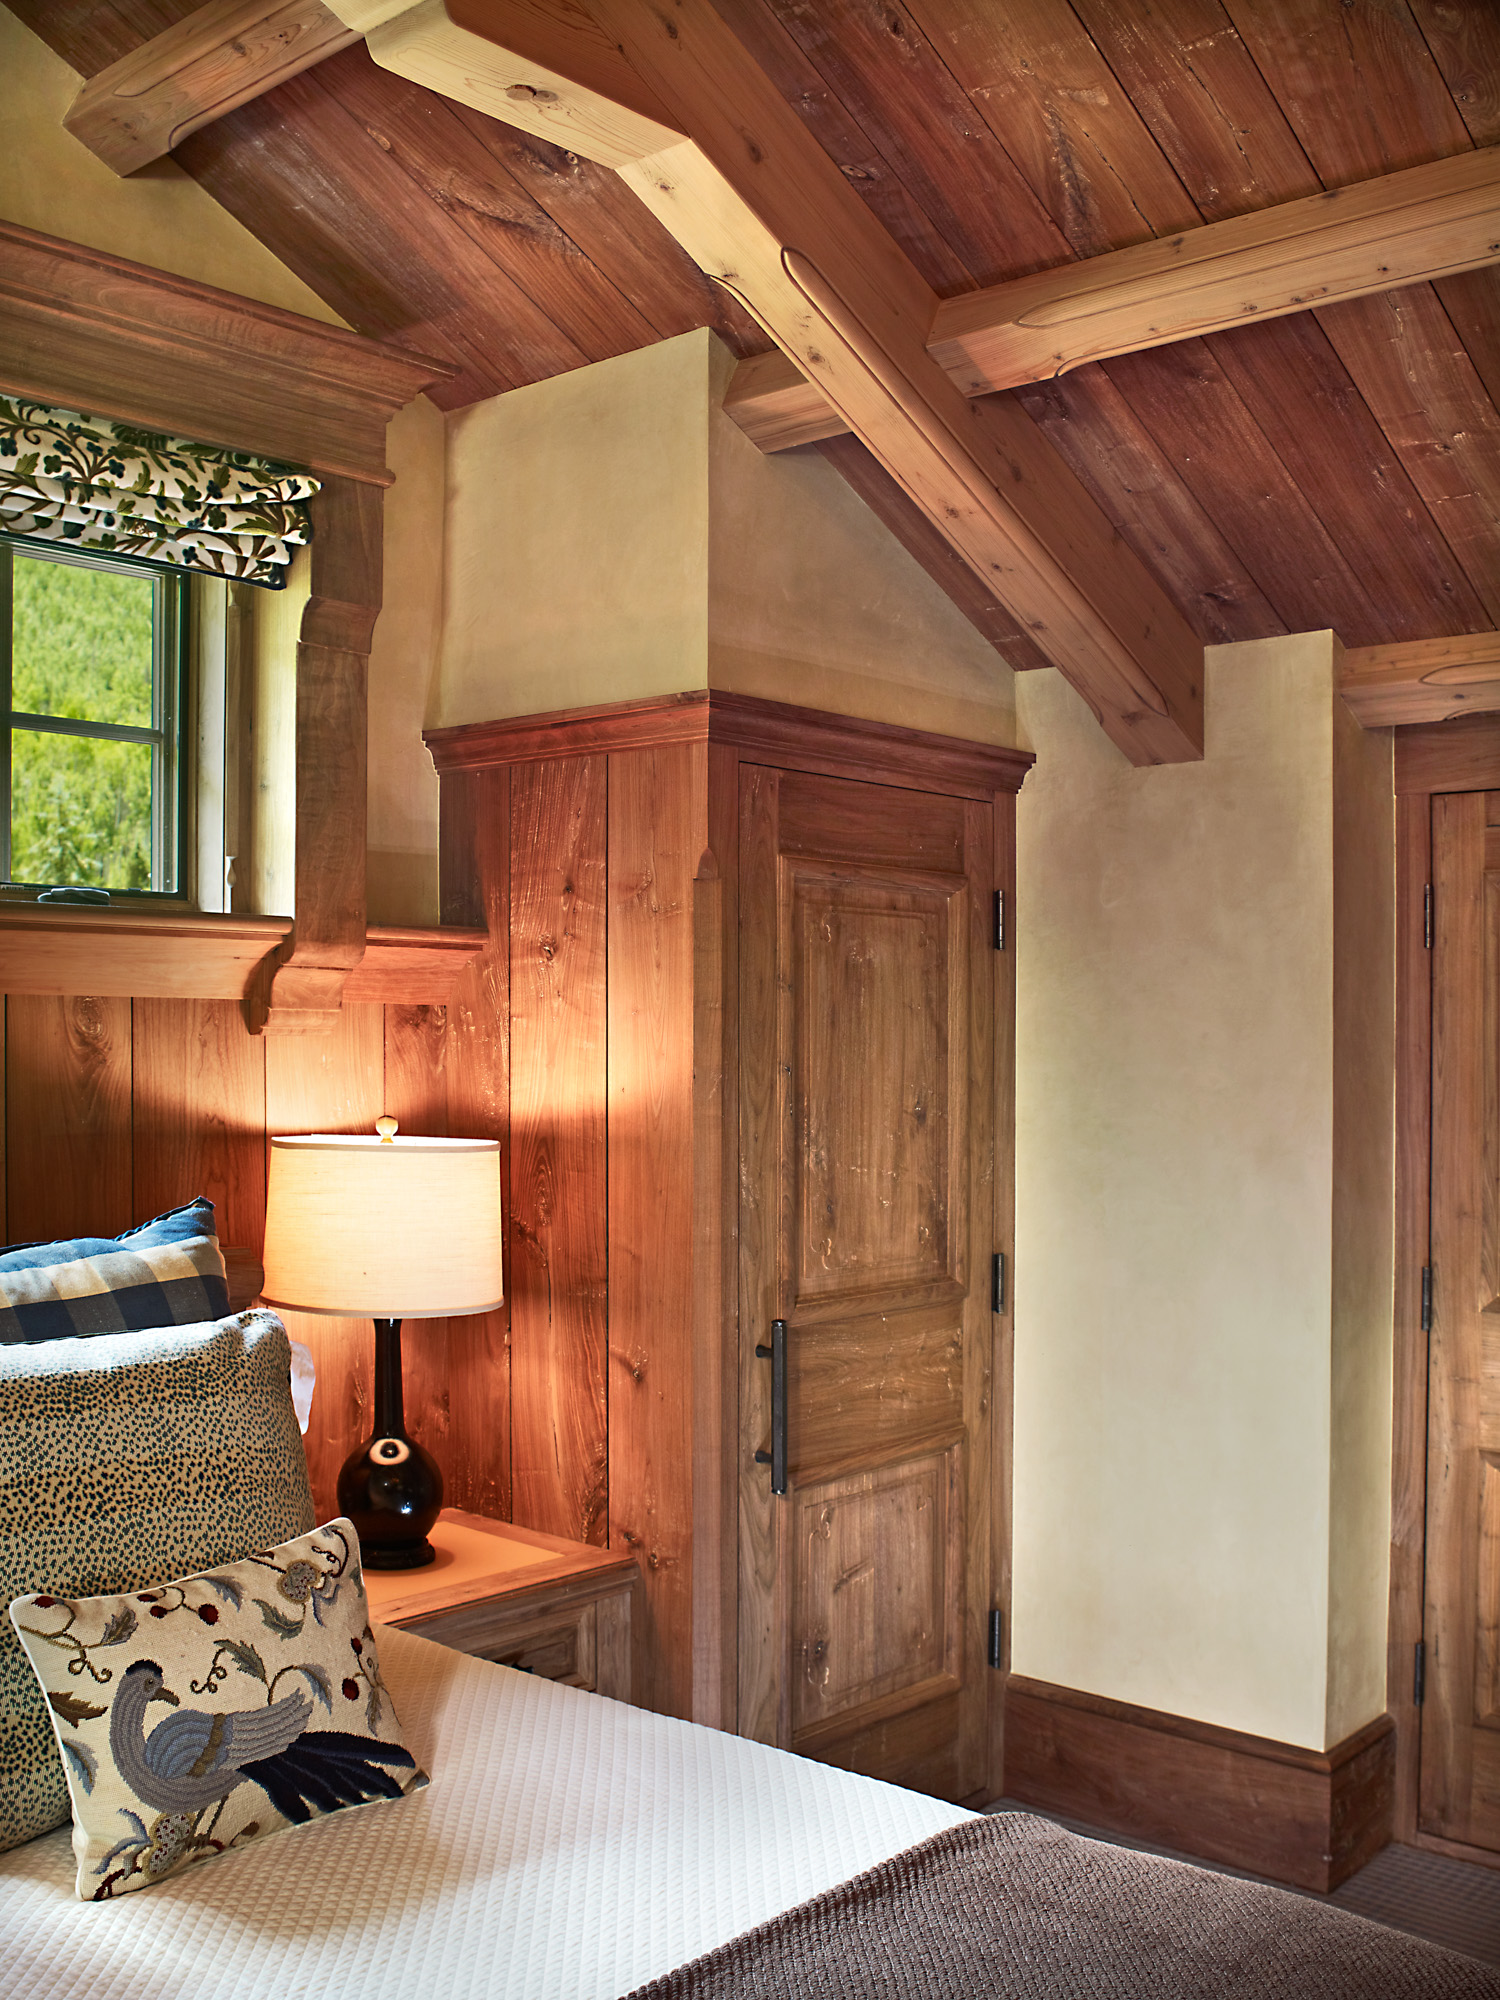 a corner of a rustic-traditional style bedroom at hornsilver